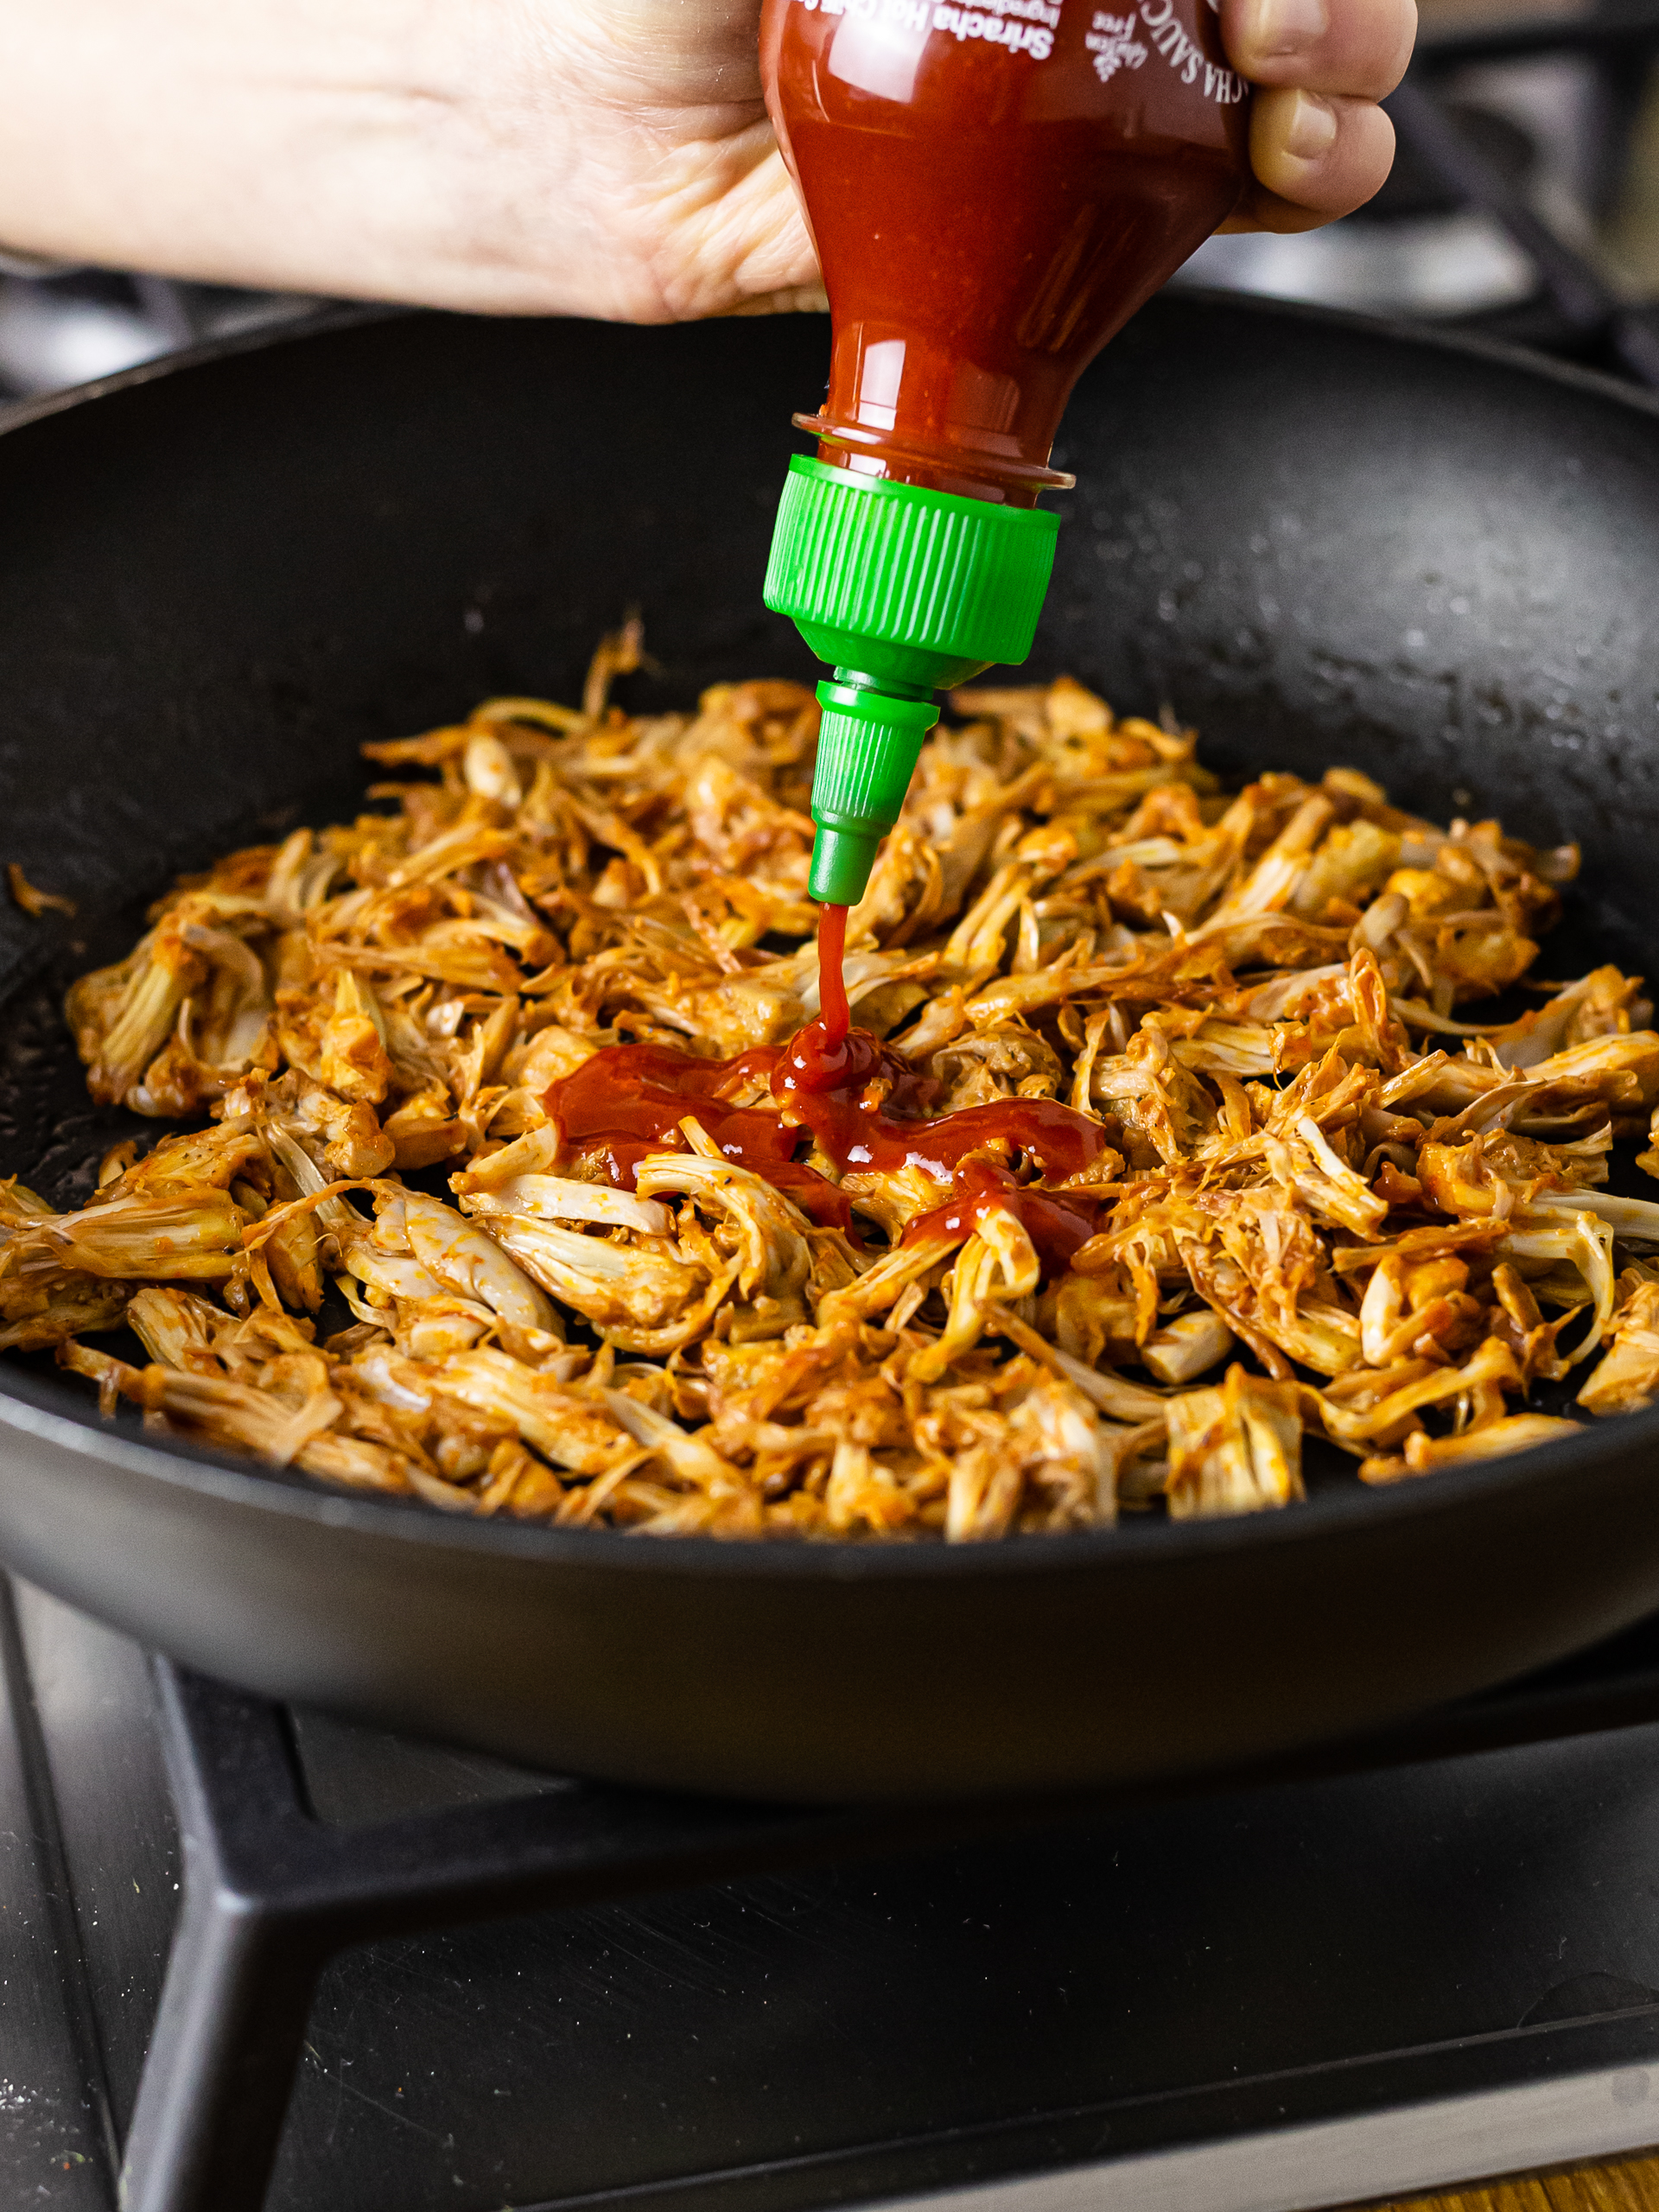 pulled jackfruit cooked with sriracha sauce